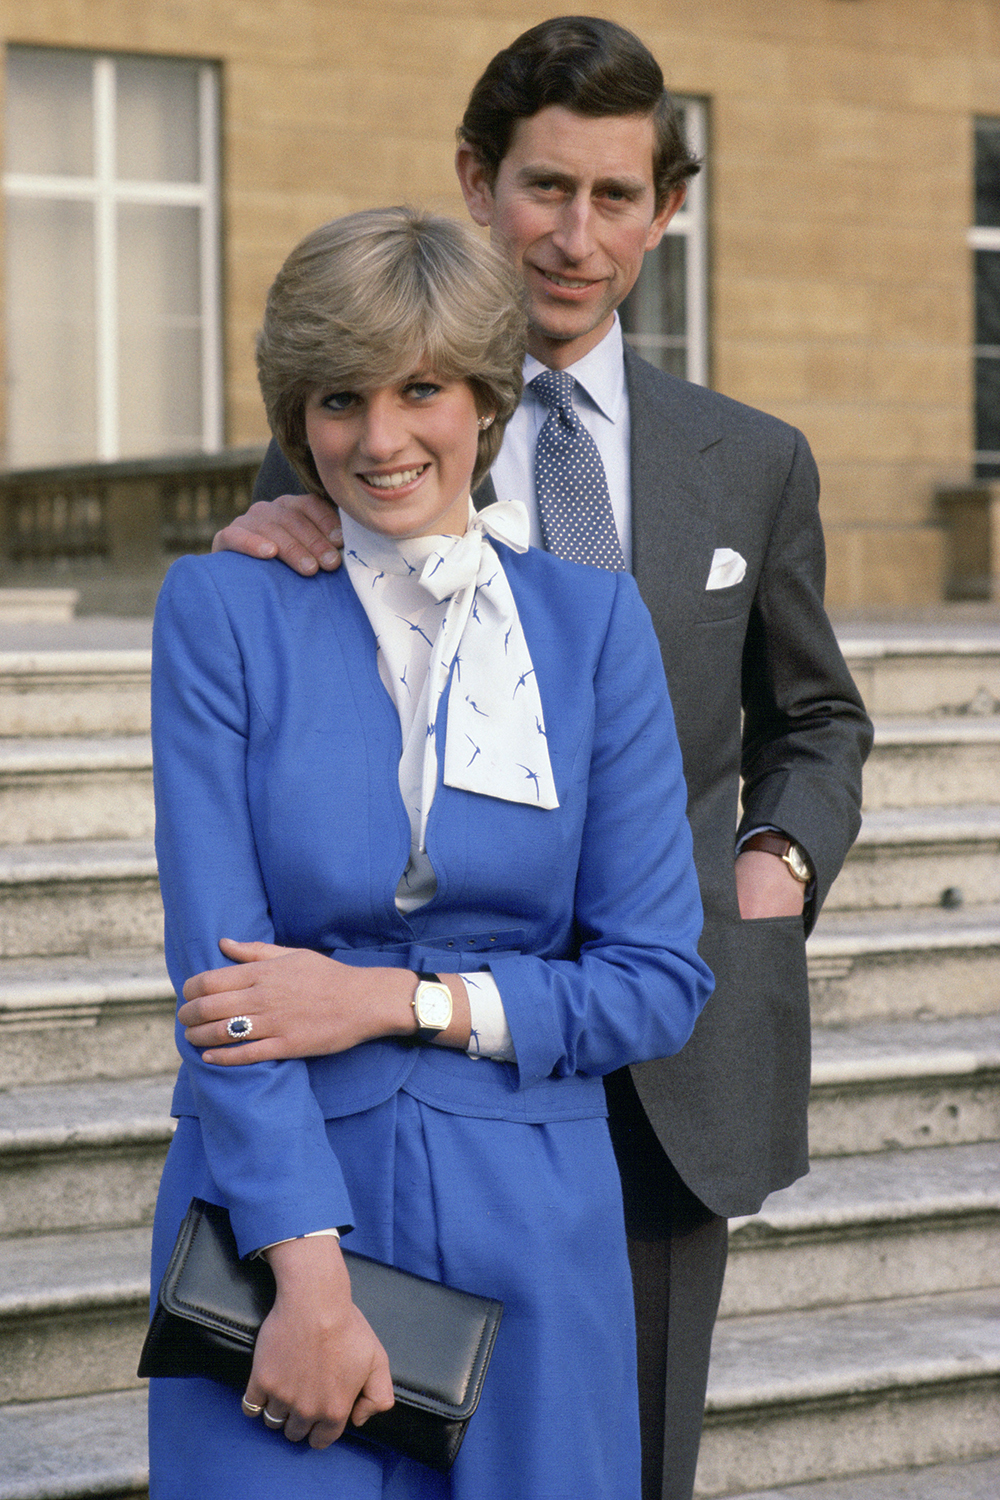 Febuary 24th, 1981 - Diana and Prince Charles announce their engagement.